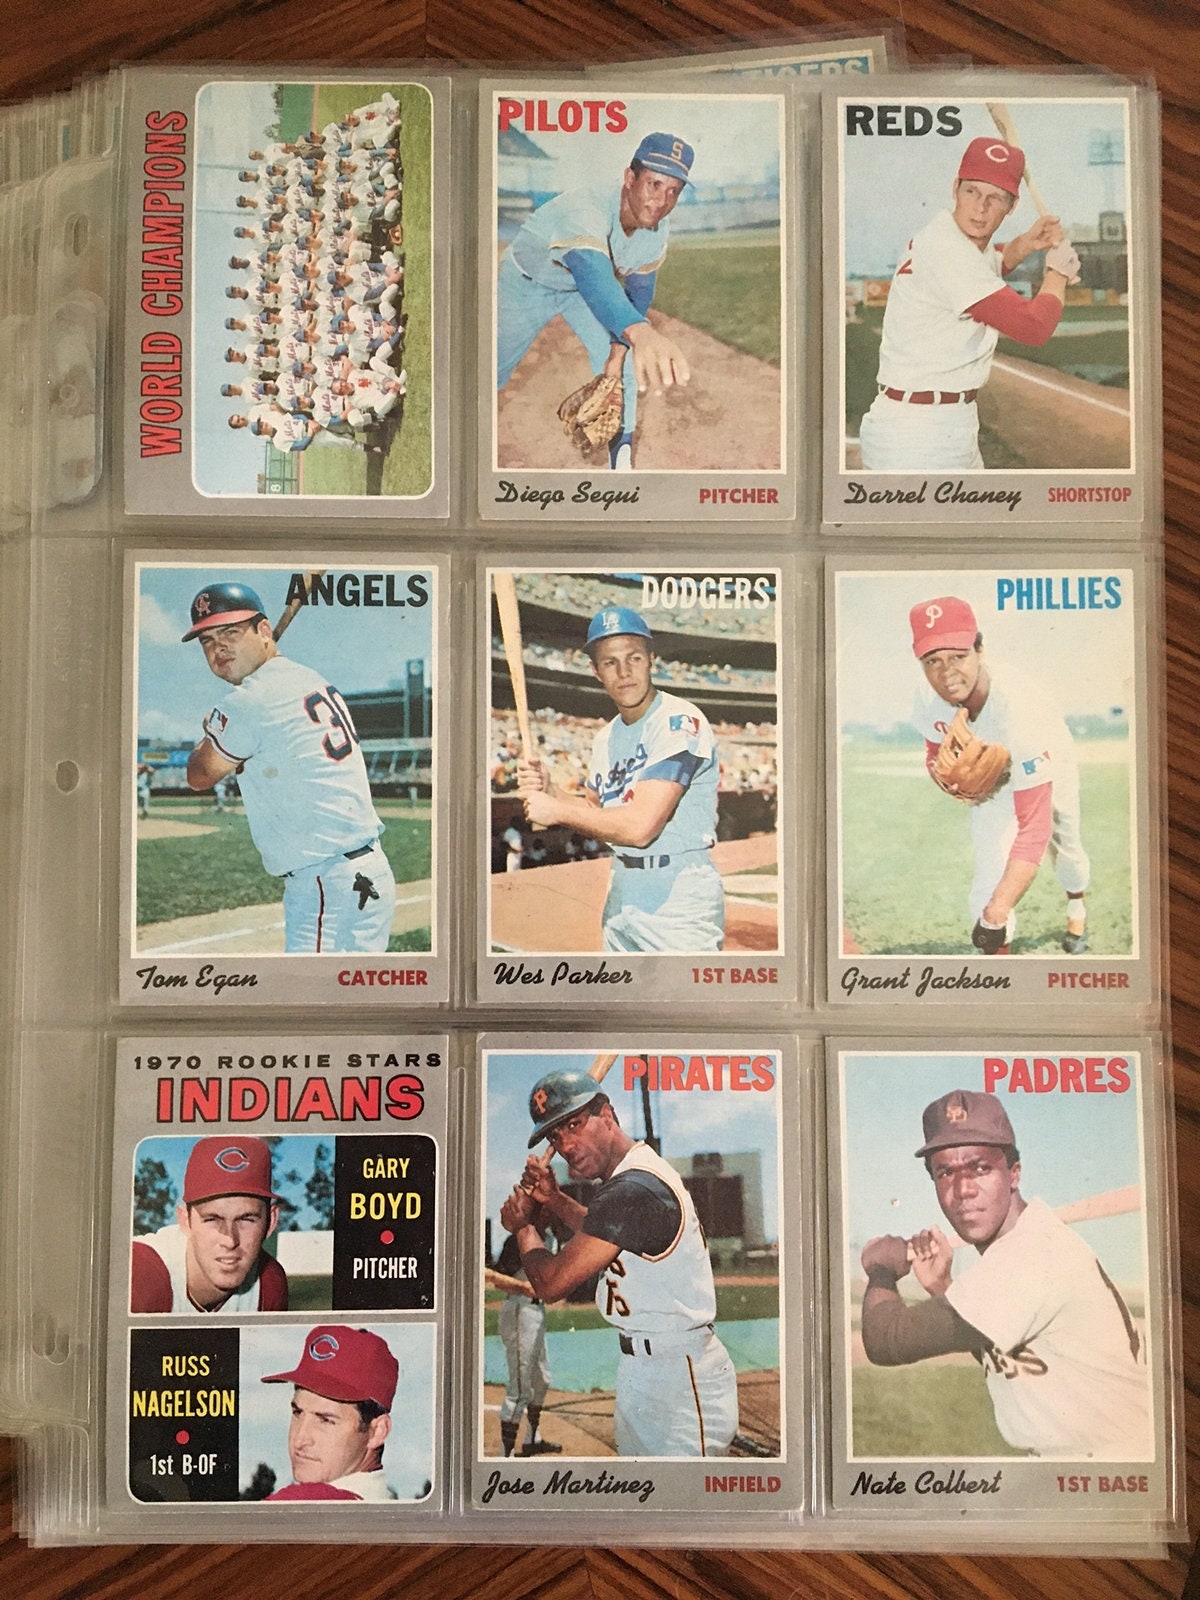 The 1978 Topps Baseball Set: A Comprehensive Guide to the Classic